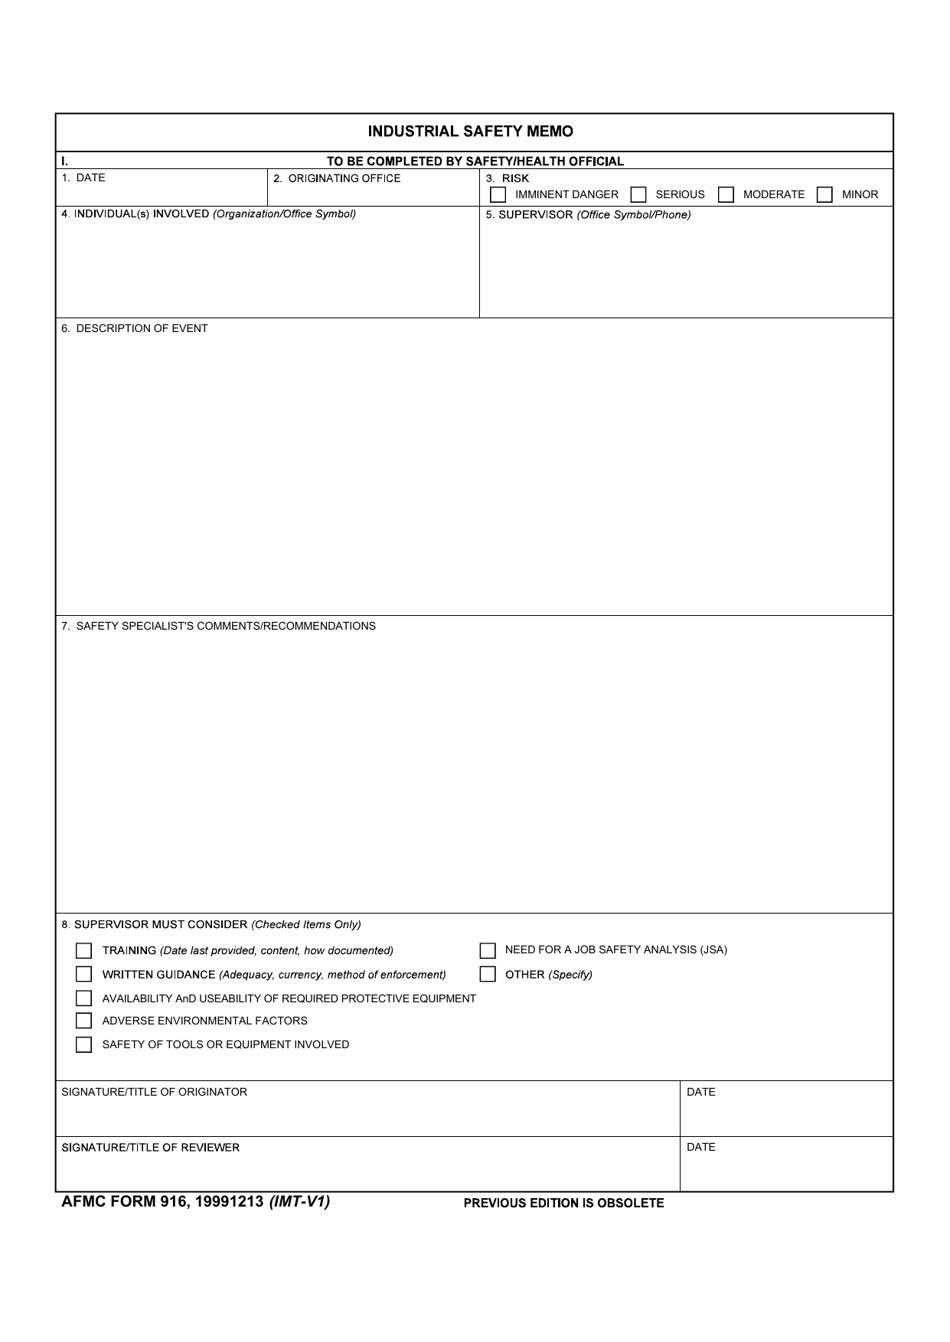 AFMC Form 916 Industrial Safety Memo, Page 1